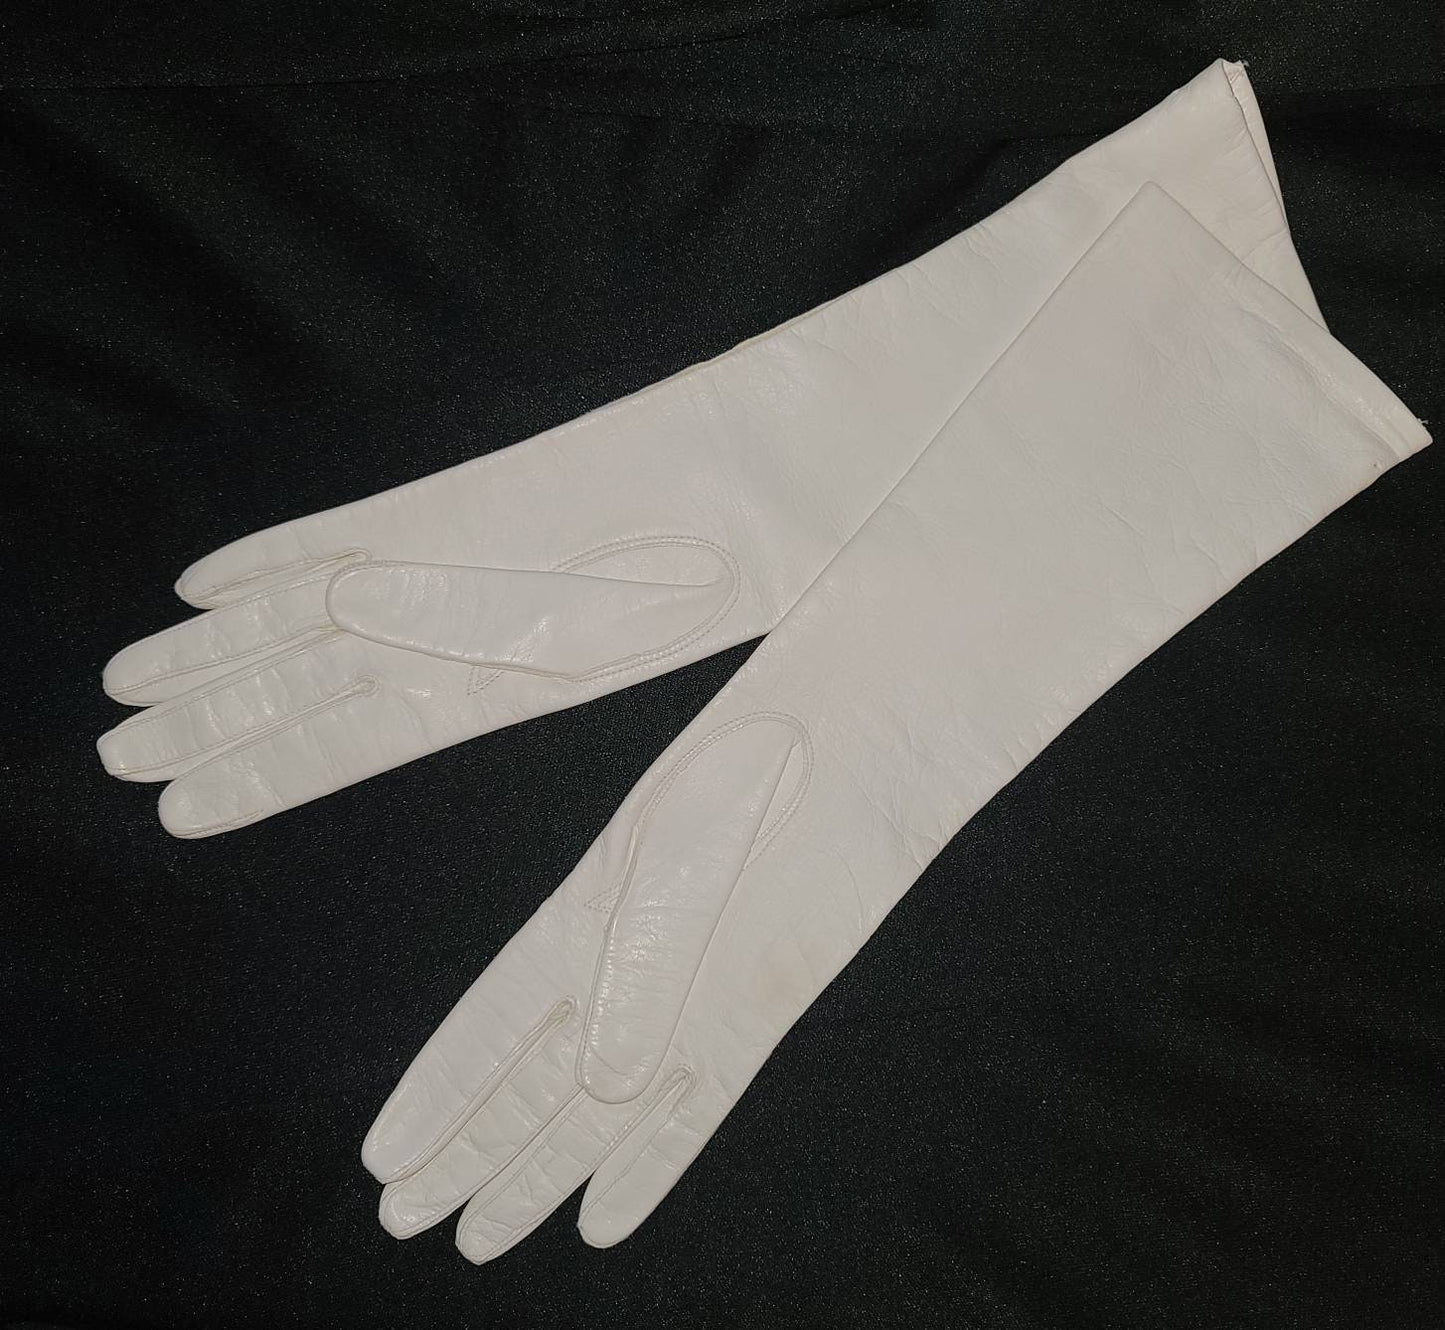 Vintage Leather Gloves 1950s 60s Elbow Length Cream White Kid Leather Gloves Made in Italy Silk Lined Rockabilly Wedding Bridal 6